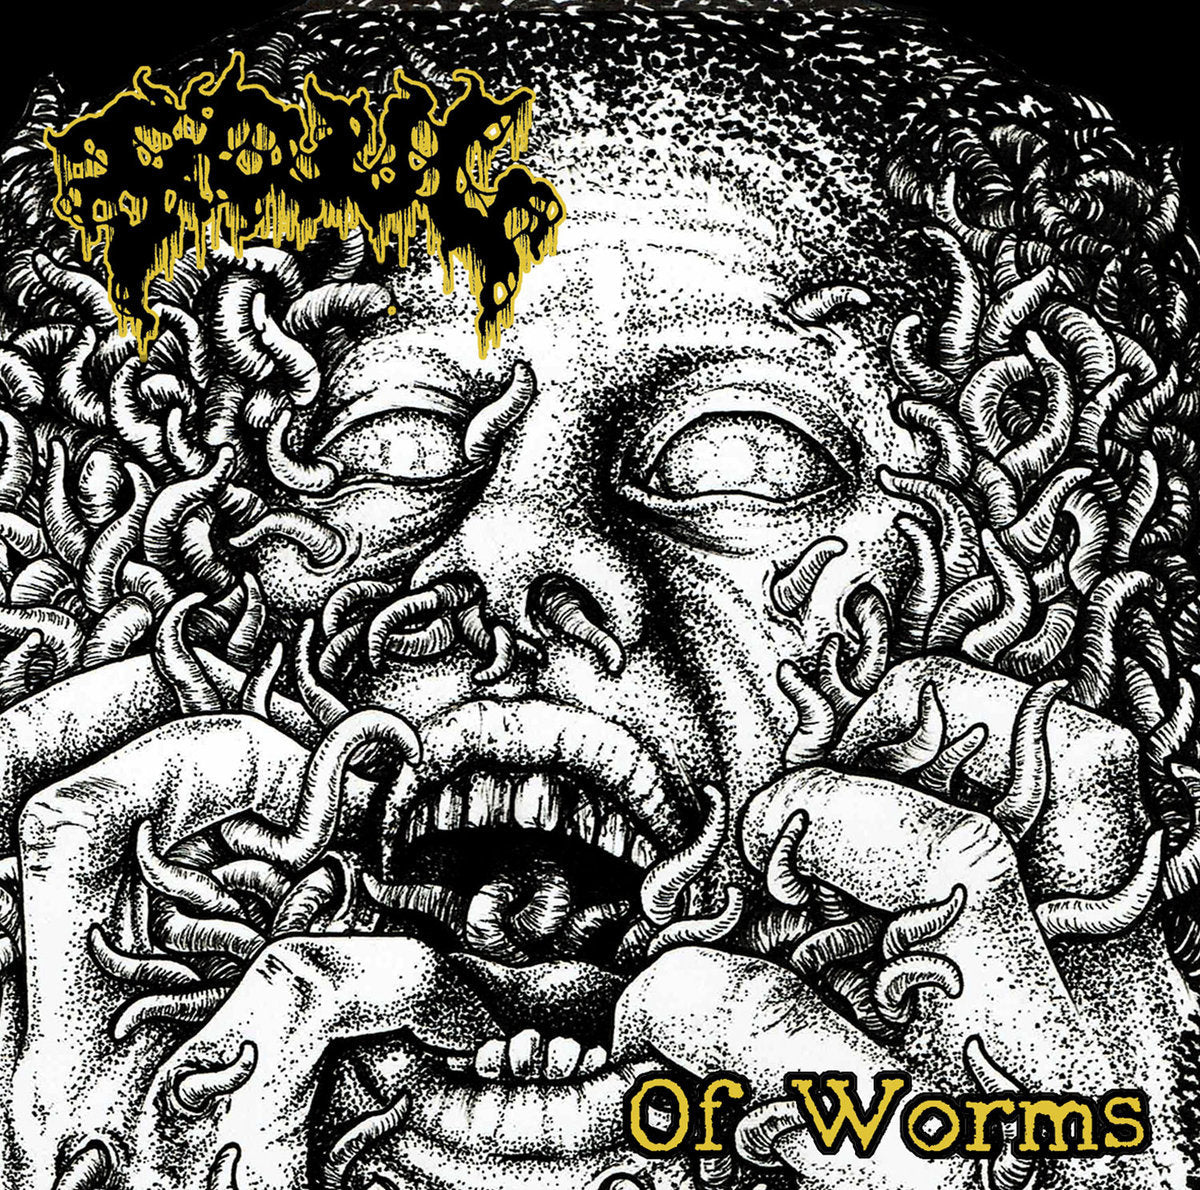 FOUL - Of Worms - CD